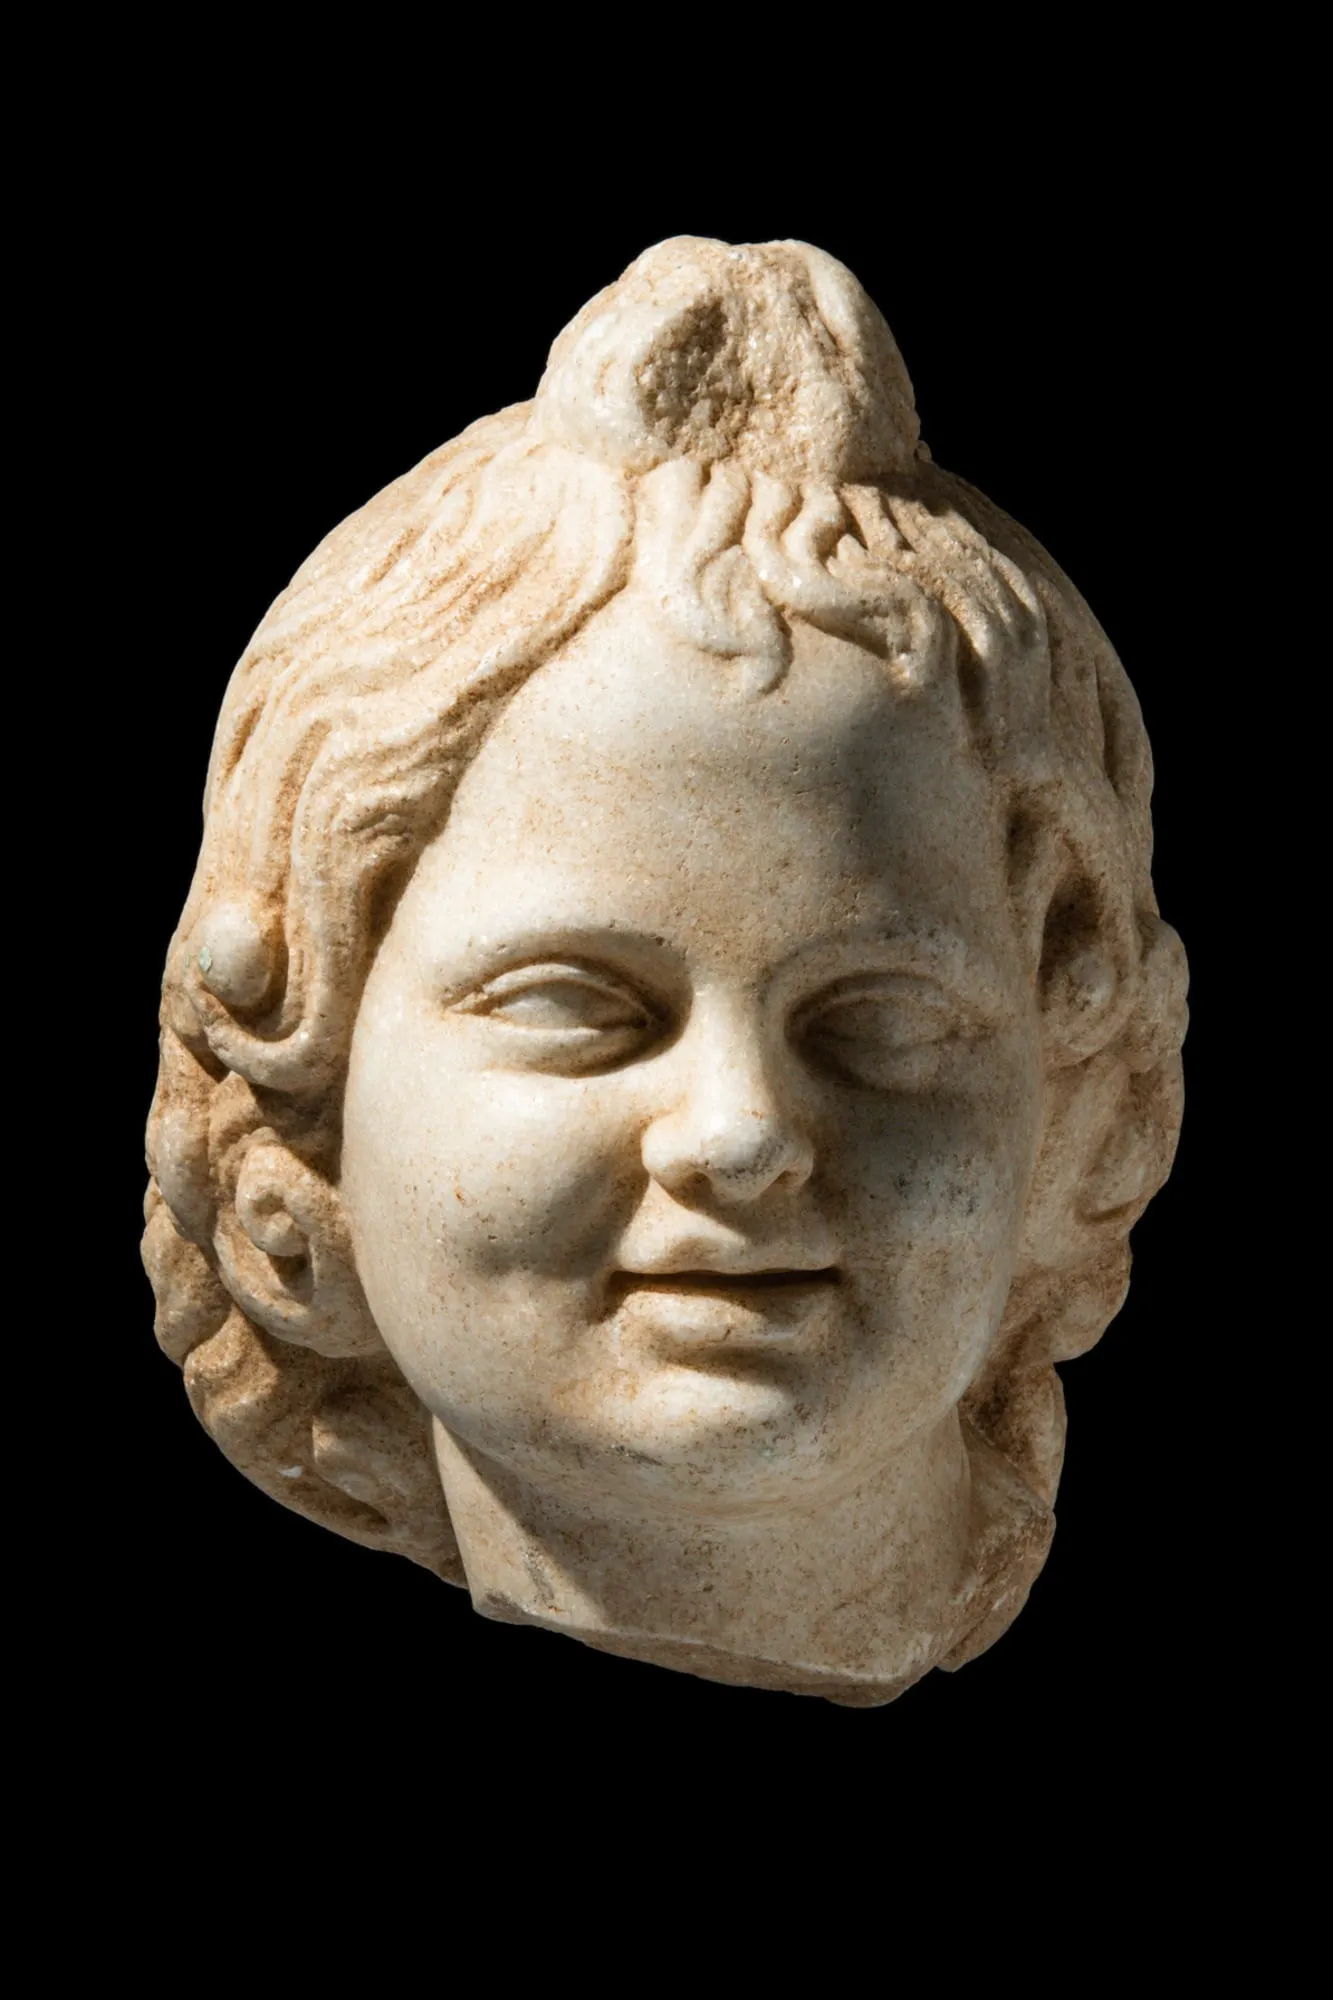 Apollo offers artifacts from the ancient world as well as Chinese and Islamic art Jan. 28-29